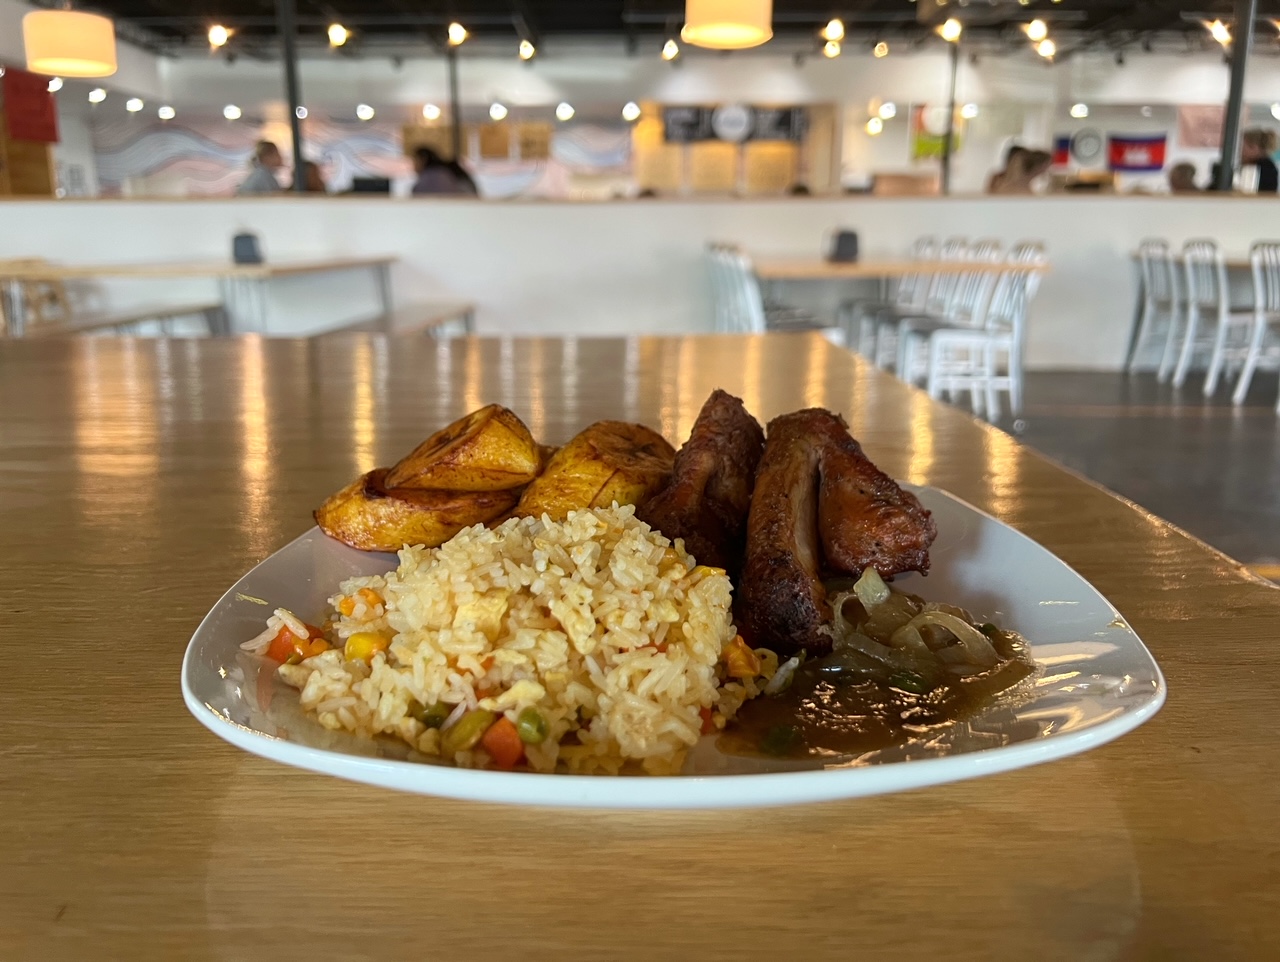 On a wooden table inside Broadway Food Hall in Urbana, there is a white plate of Congolese food: pork ribs, fried rice, and plantains by the restaurant Les Gourmets Cuisine. Photo by Alyssa Buckley.